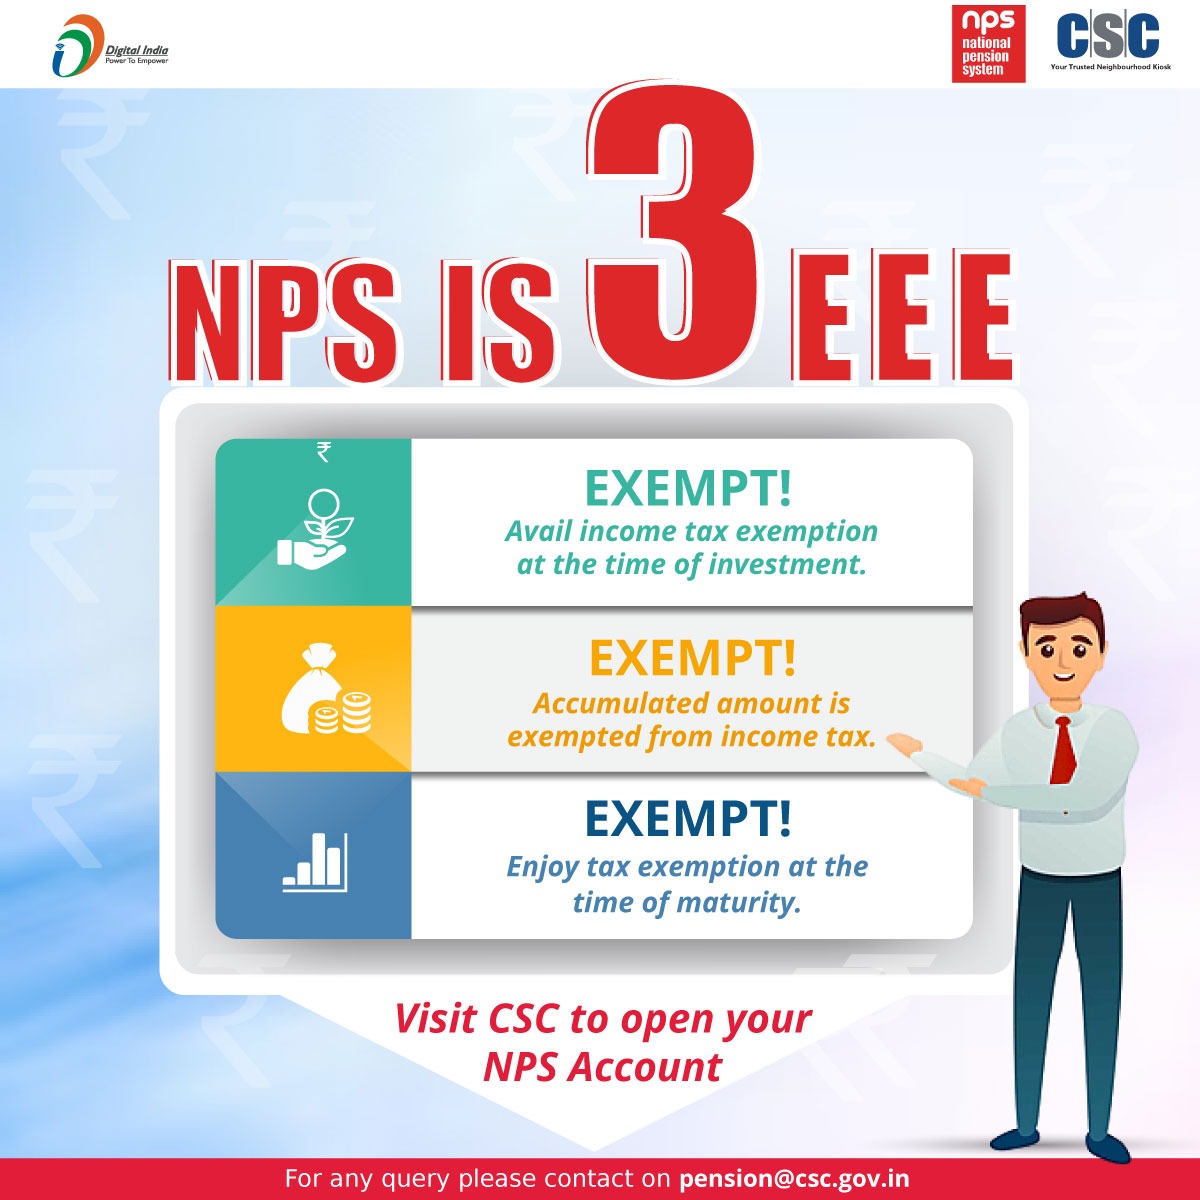 cscegov-on-twitter-nps-is-3-eee-exempt-avail-income-tax-exemption